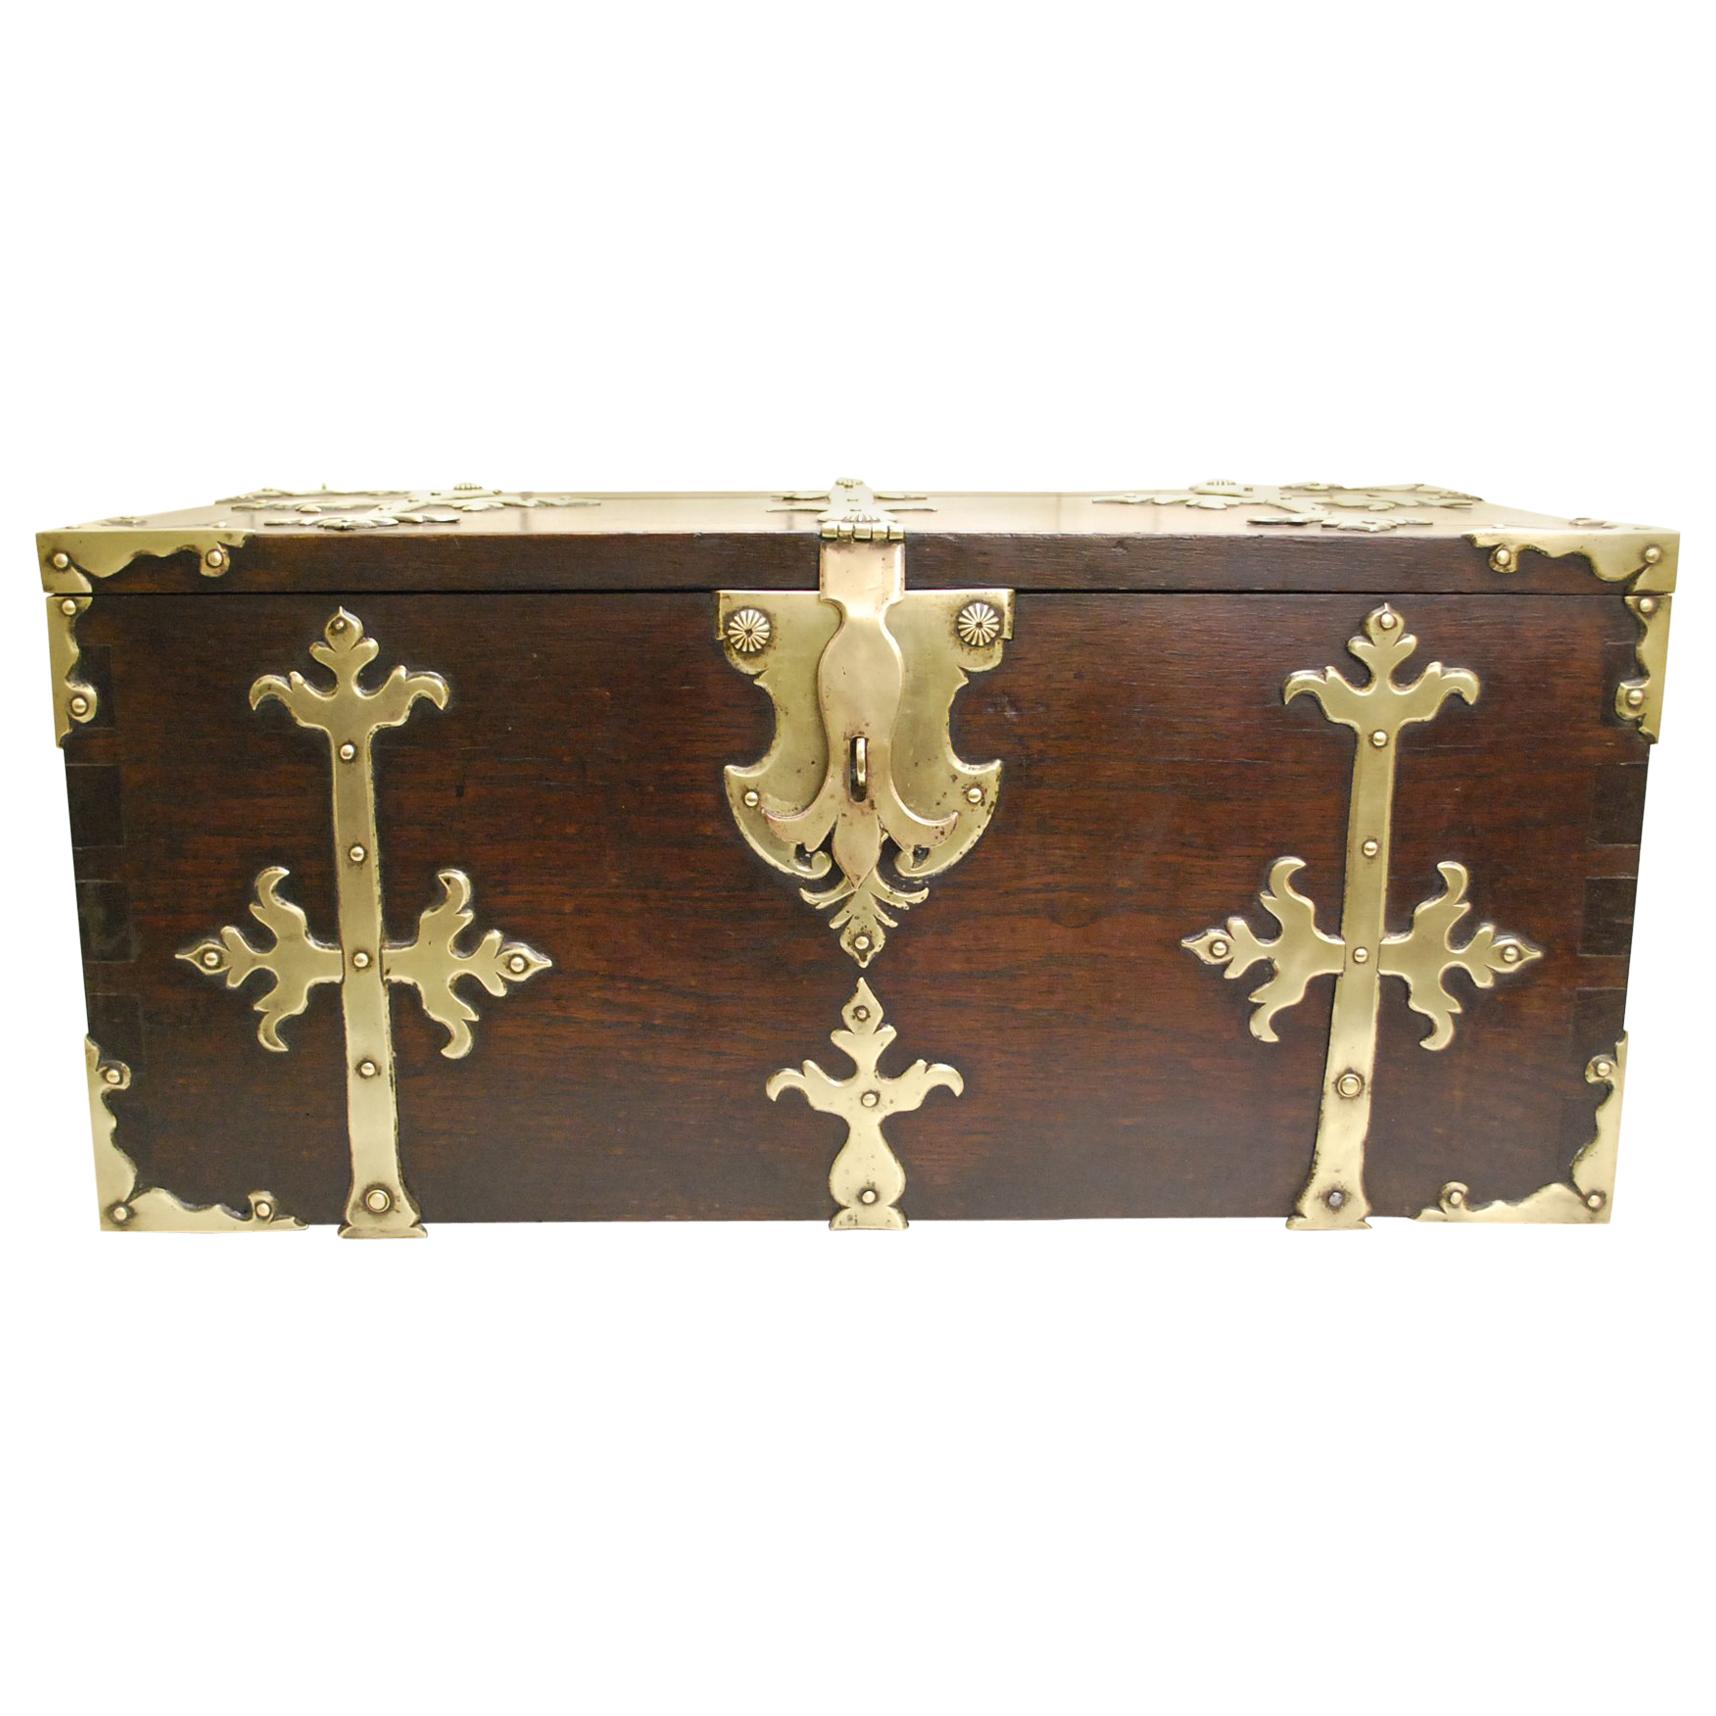 Early 18th Century Antique Spanish Strong Box or Treasure Chest For Sale